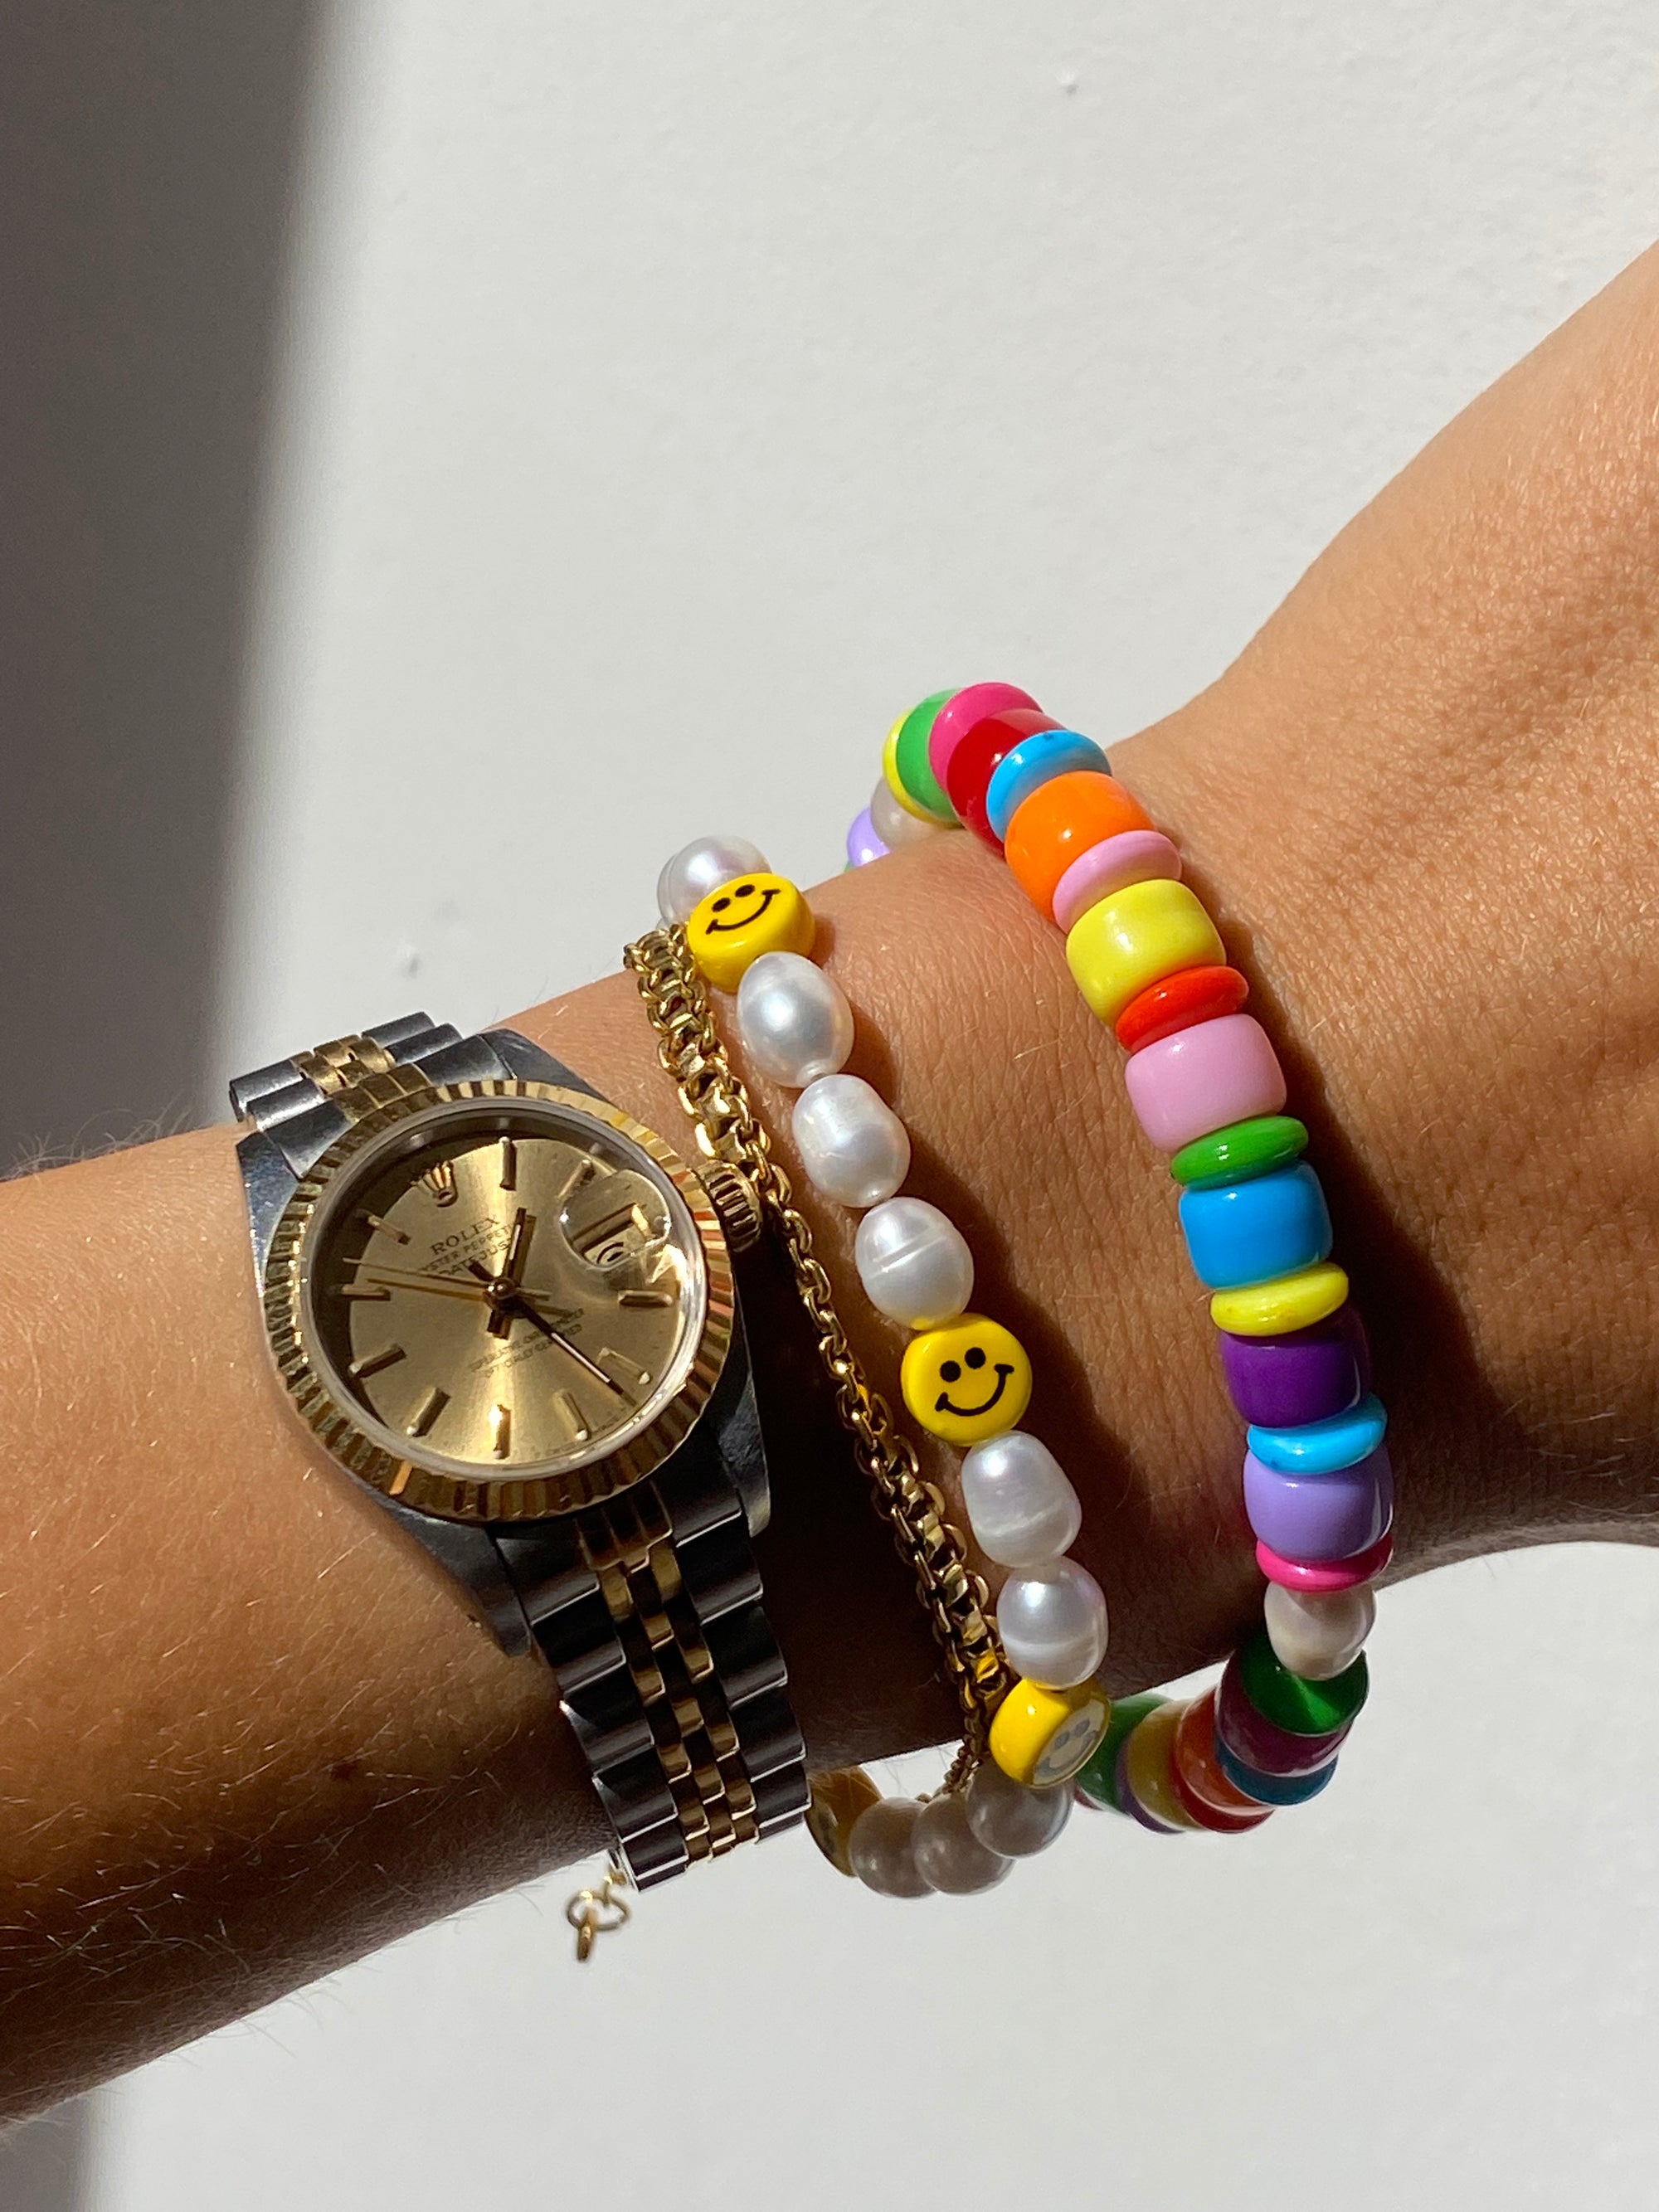 Colorful Happy Face Clay Bead Bracelet For Women Set Of 10 Hand Jewelry  Dics With Round Beaded Polymer Clay Pulseras Mujer Moda From  Chinakelly_jewelry, $51.76 | DHgate.Com